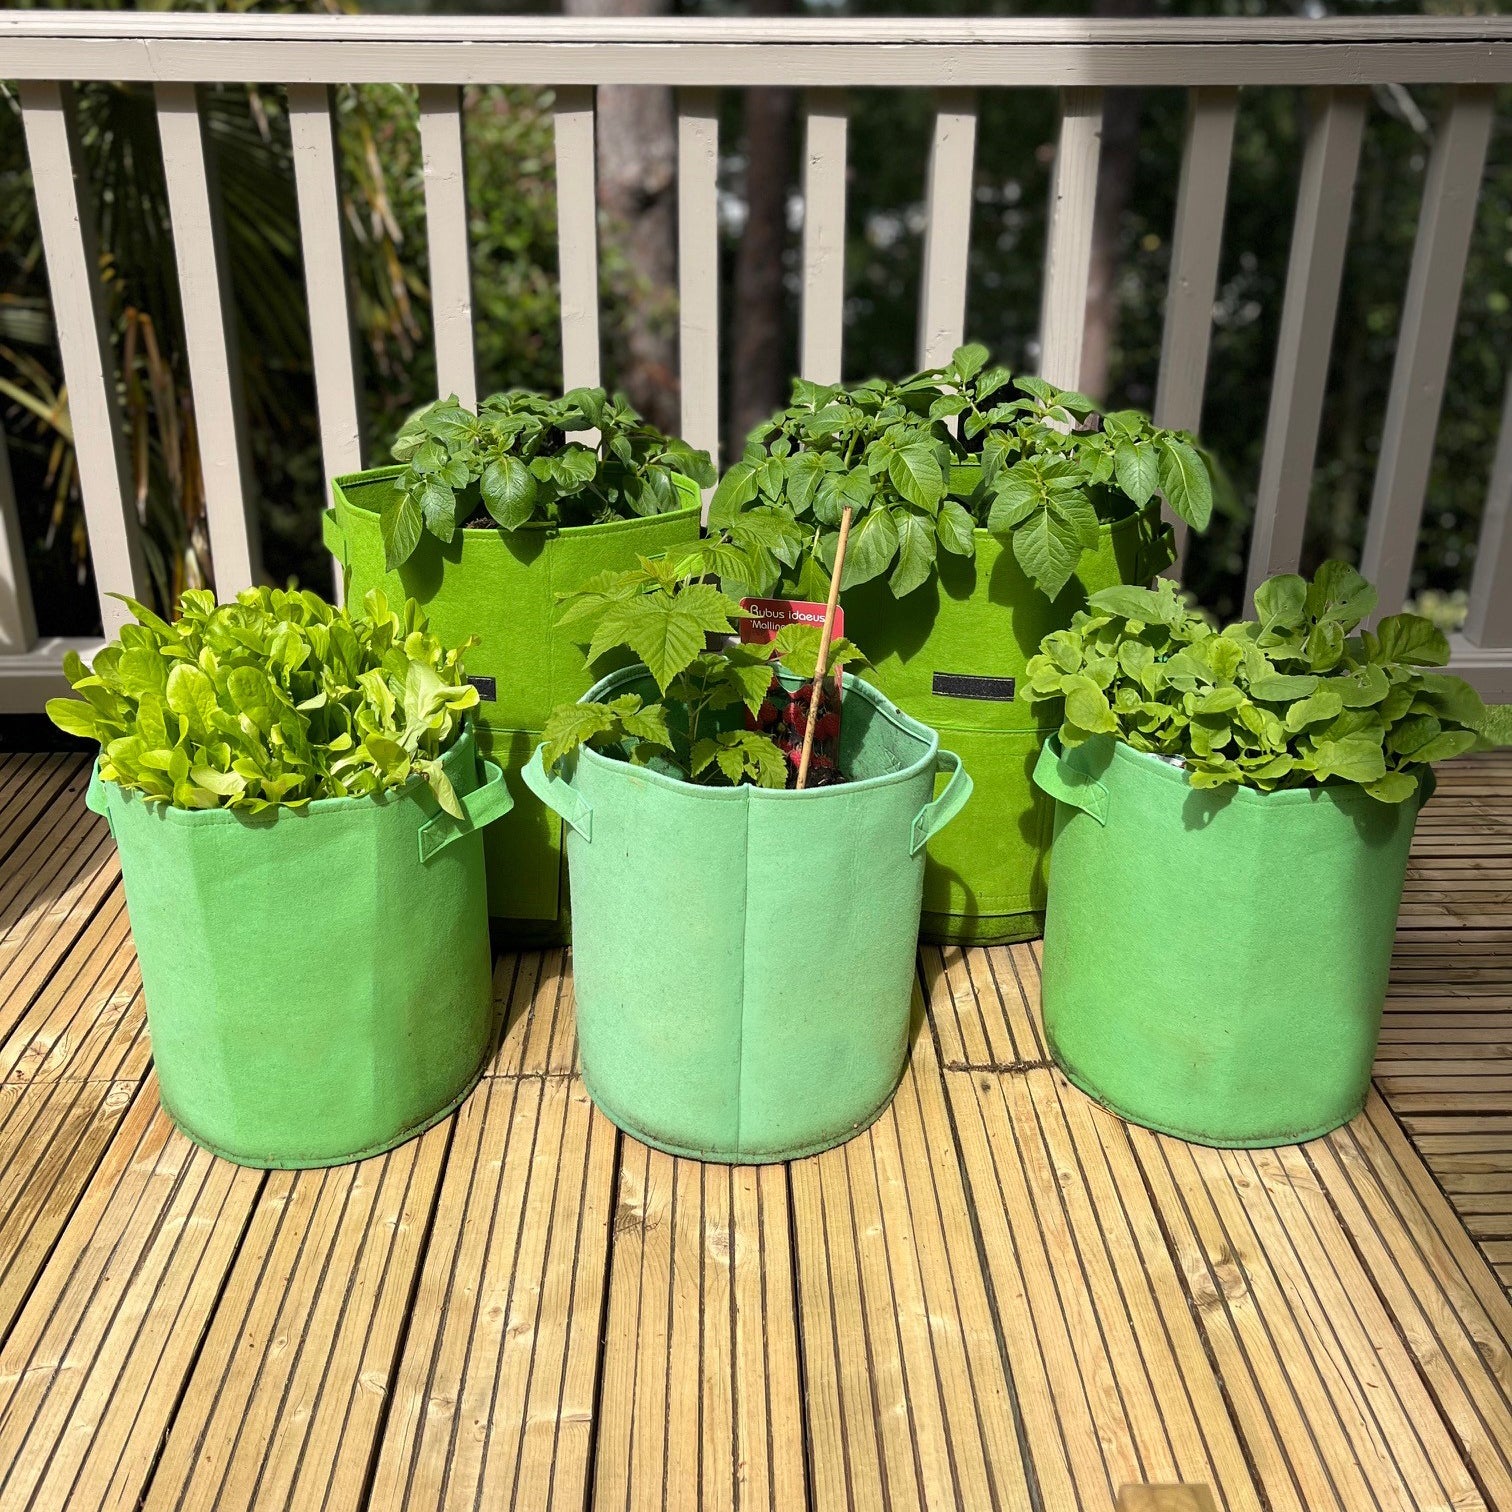 Now 25% OFF! Potato, Carrot, root vegetable Planter Bags, Fabric Pots